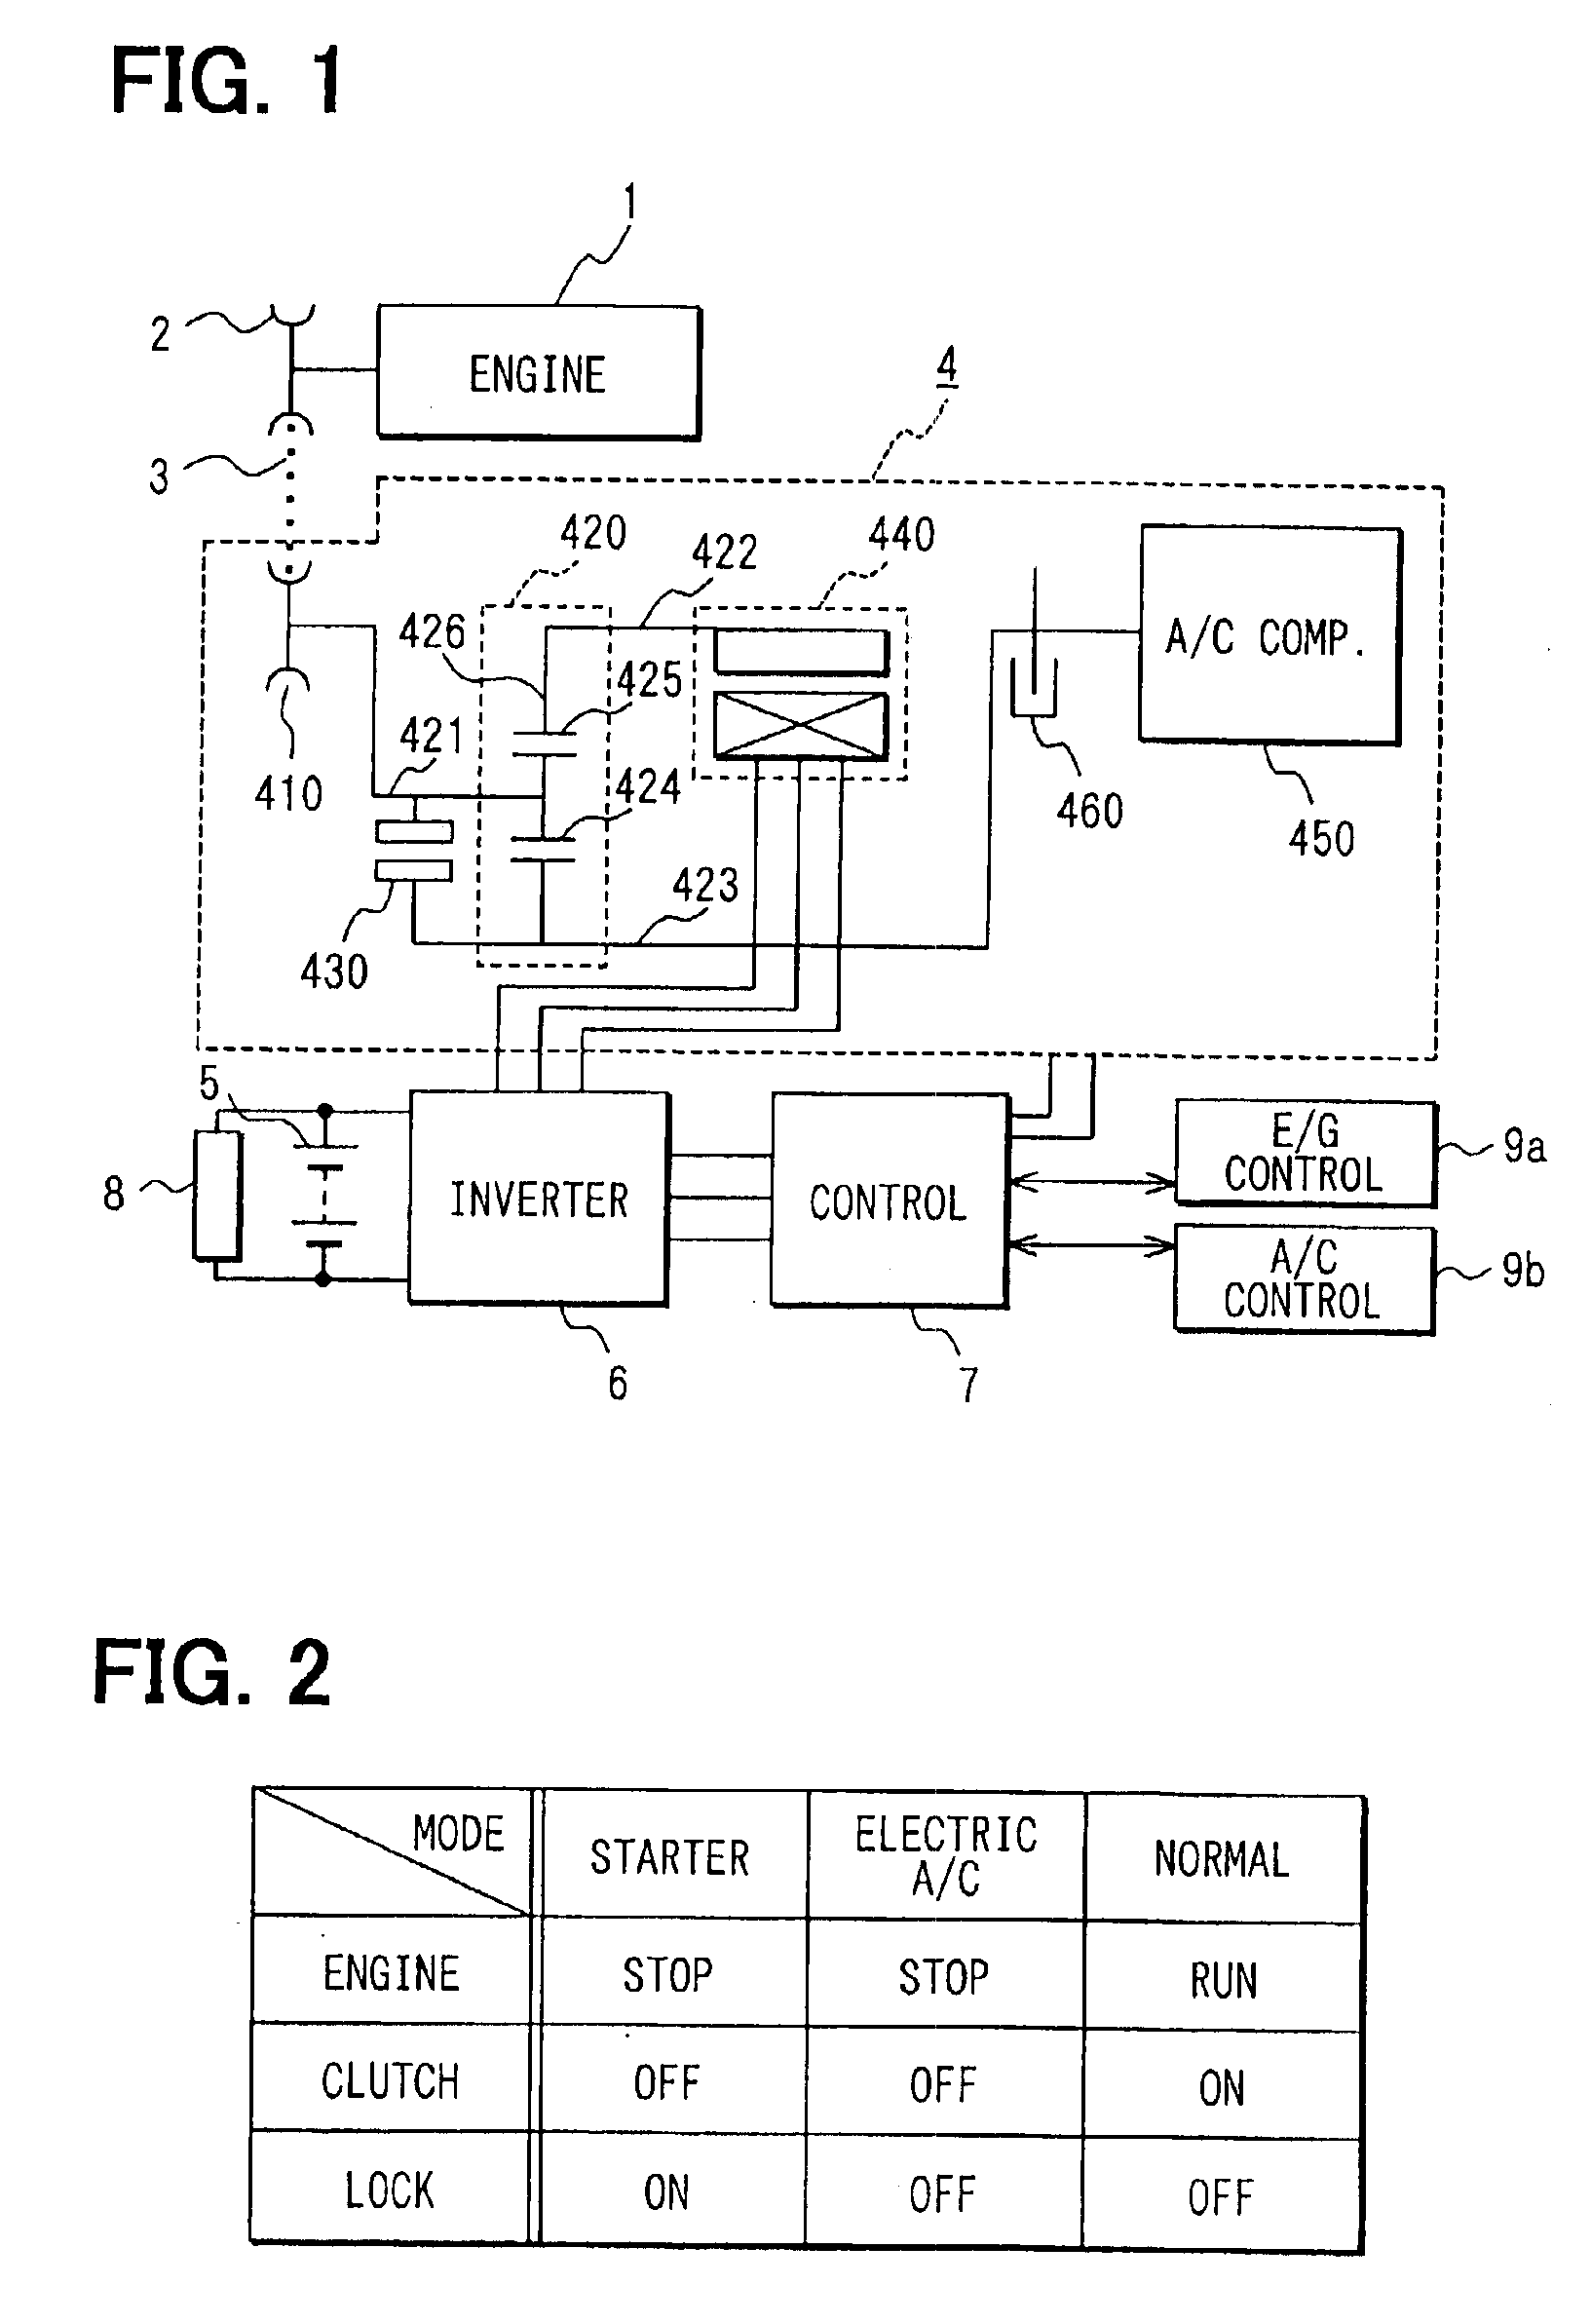 Accessory-driving equipment for an automotive vehicle